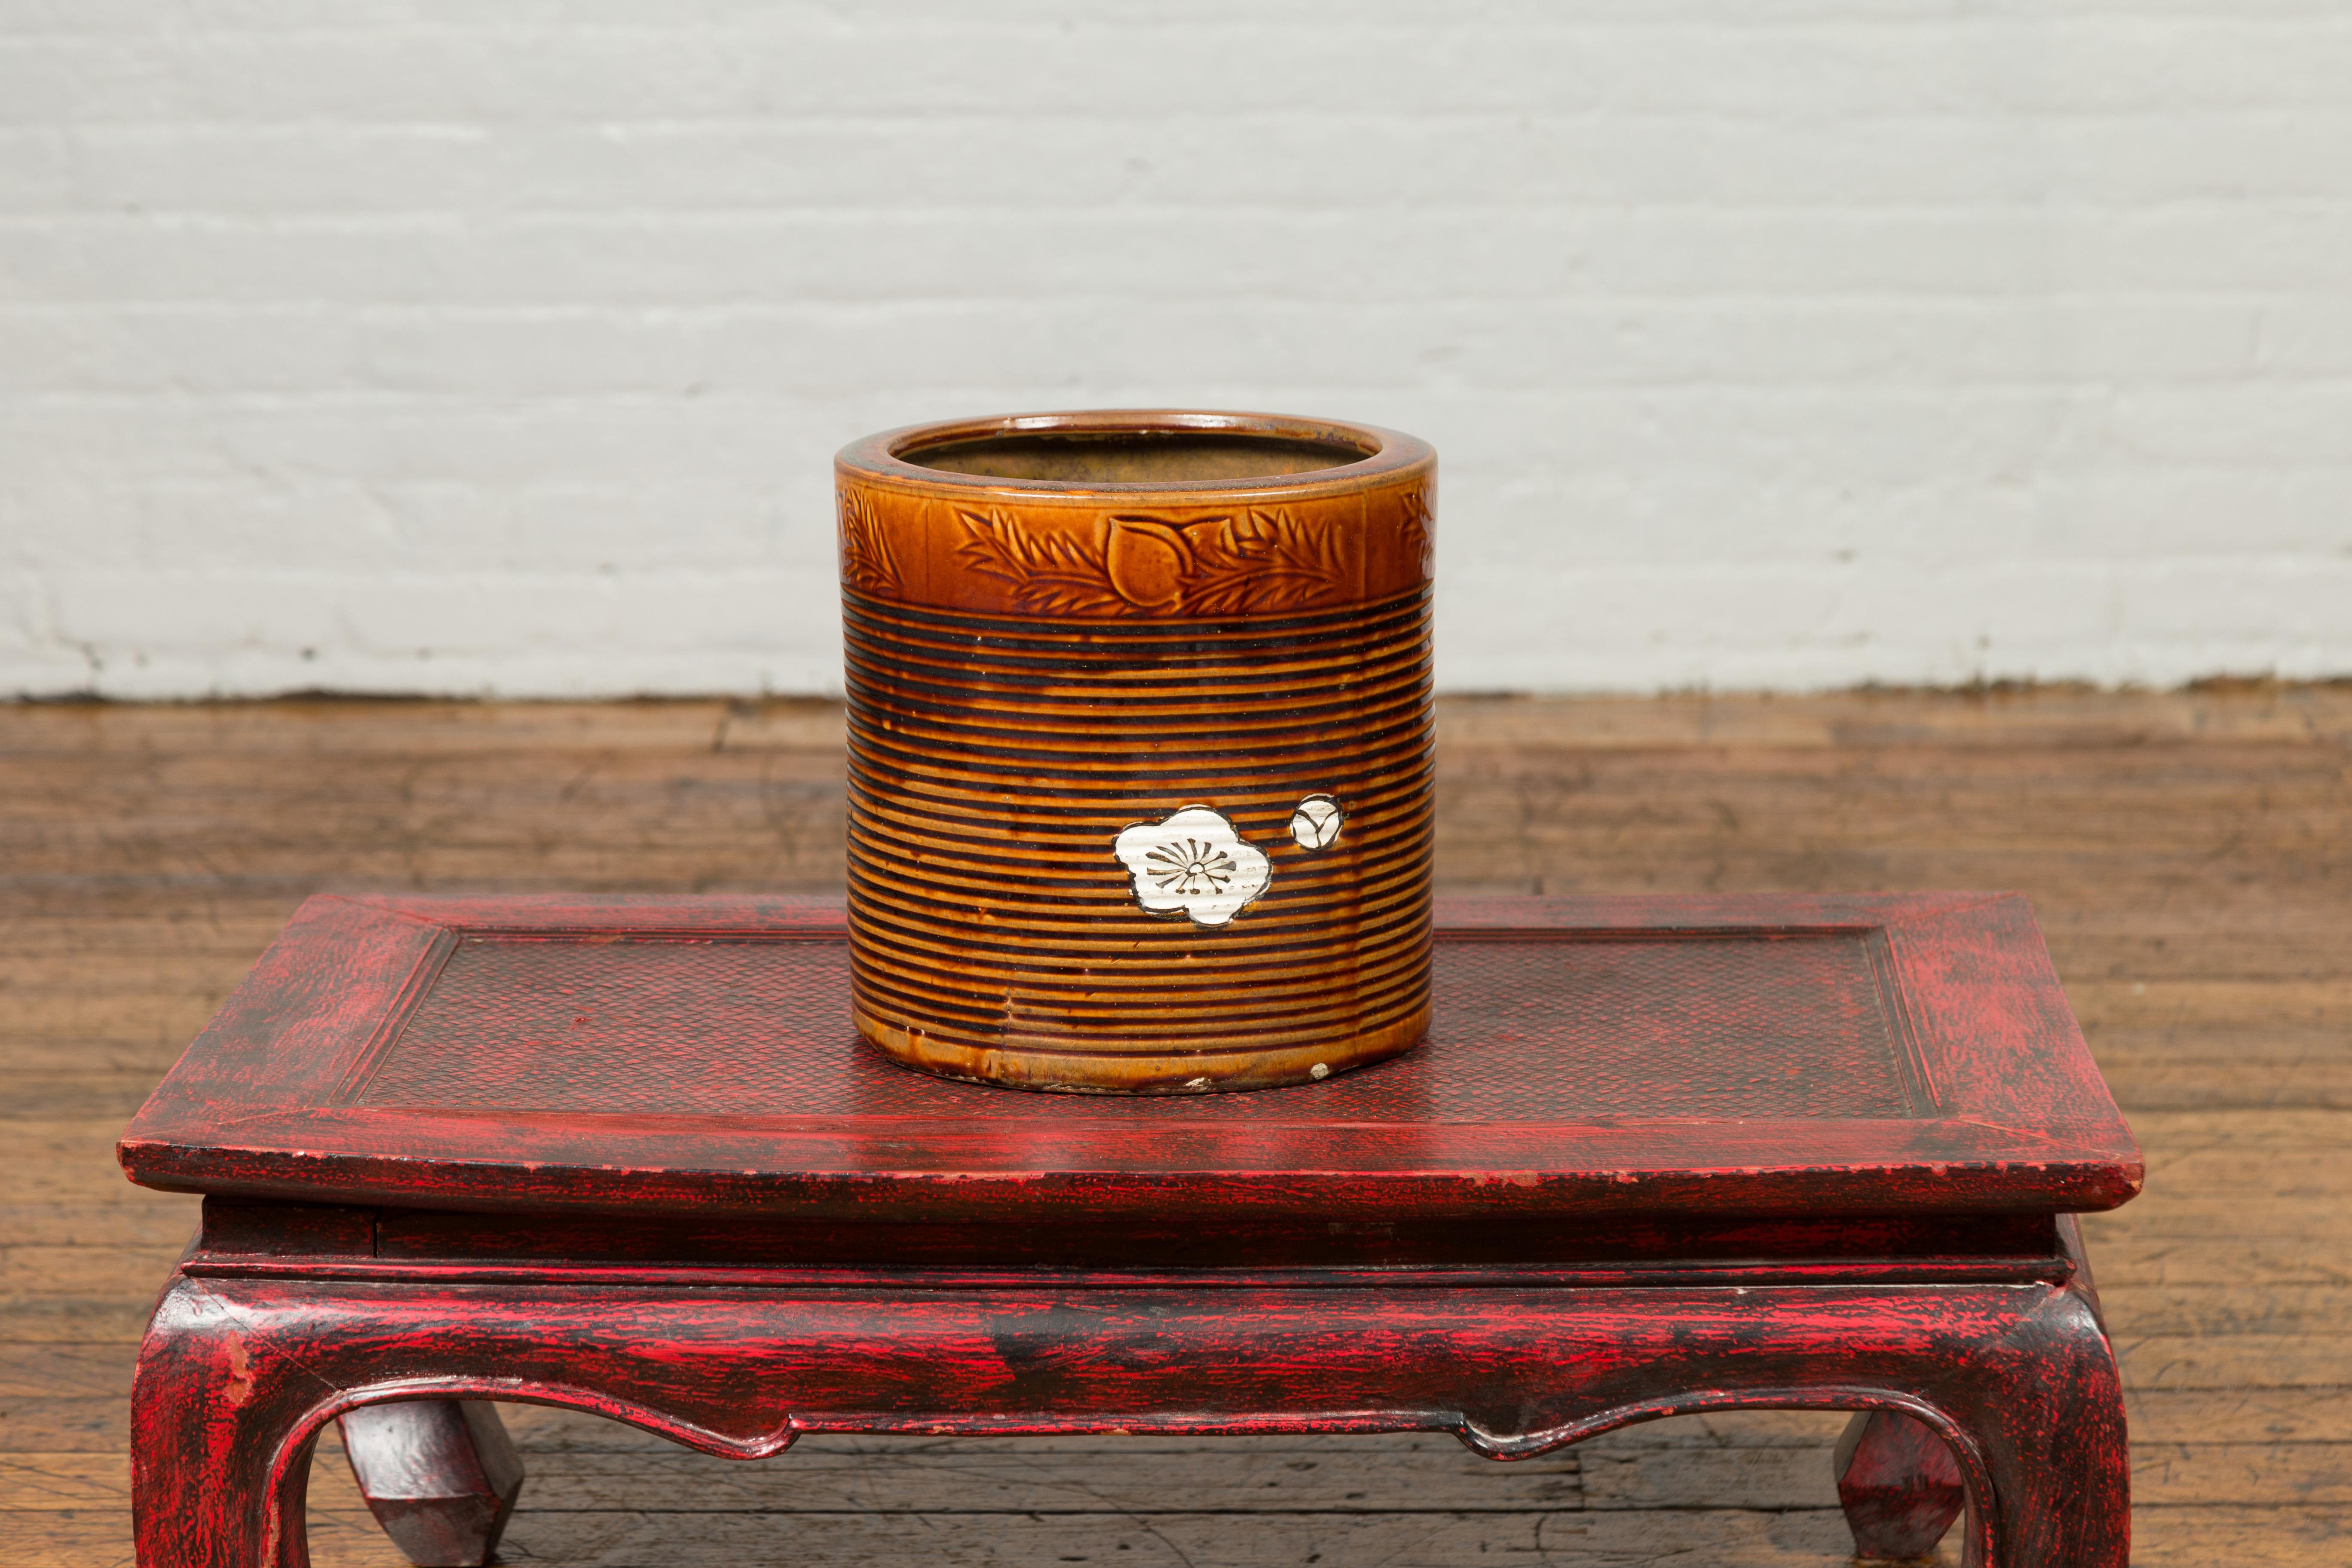 A Japanese Meiji period hibachi planter from the 19th century, with floral motifs and burnt orange patina. Created in Japan during the Meiji period, this hibachi was used for cooking or warming sake or tea. Presenting a cylindrical silhouette